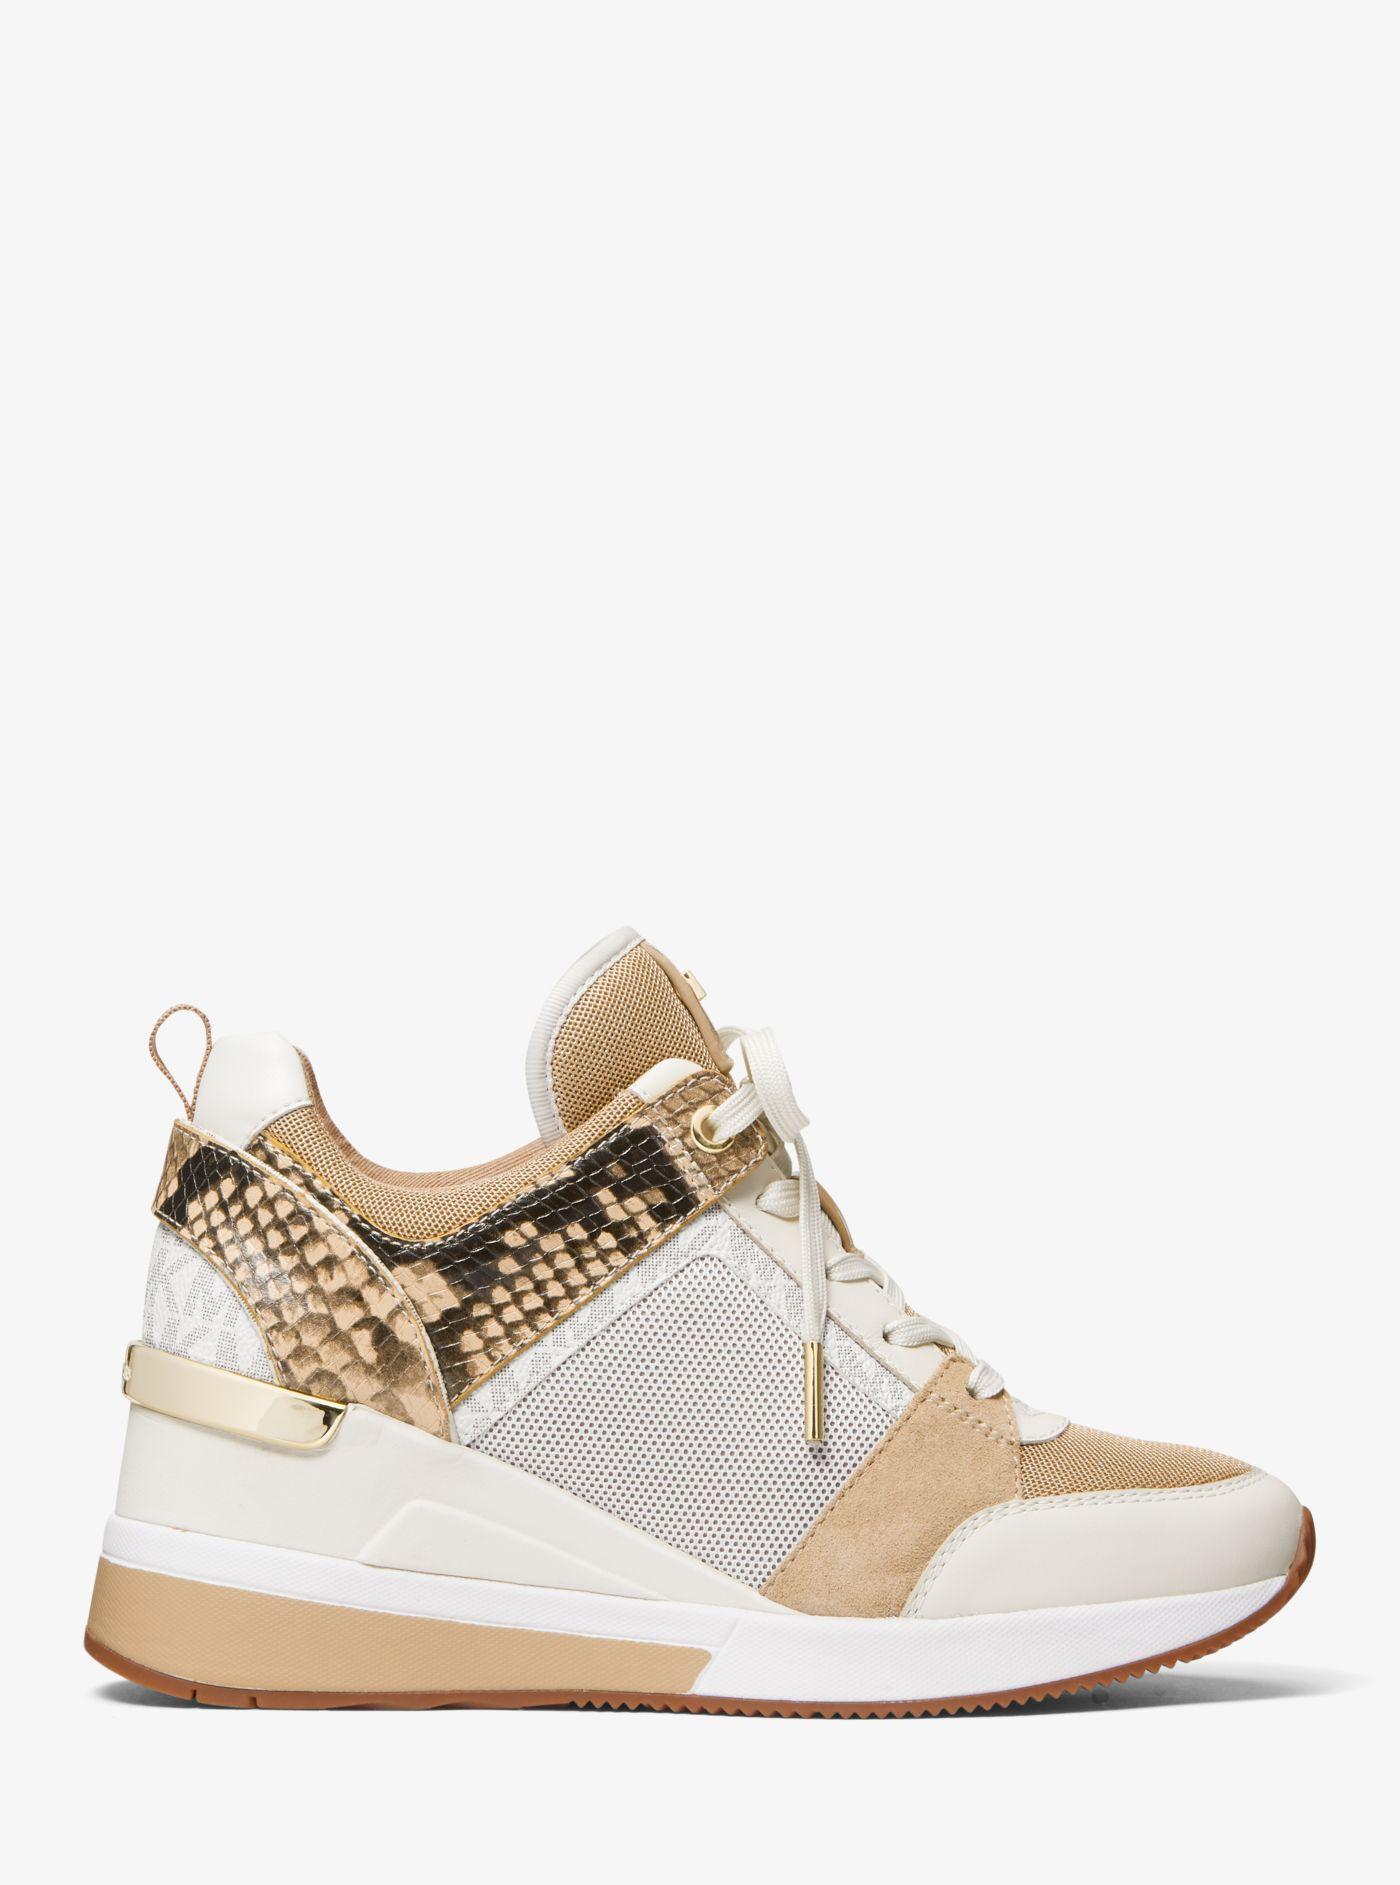 Michael Kors Leather Georgie Mixed-media Trainer in Camel (Natural 